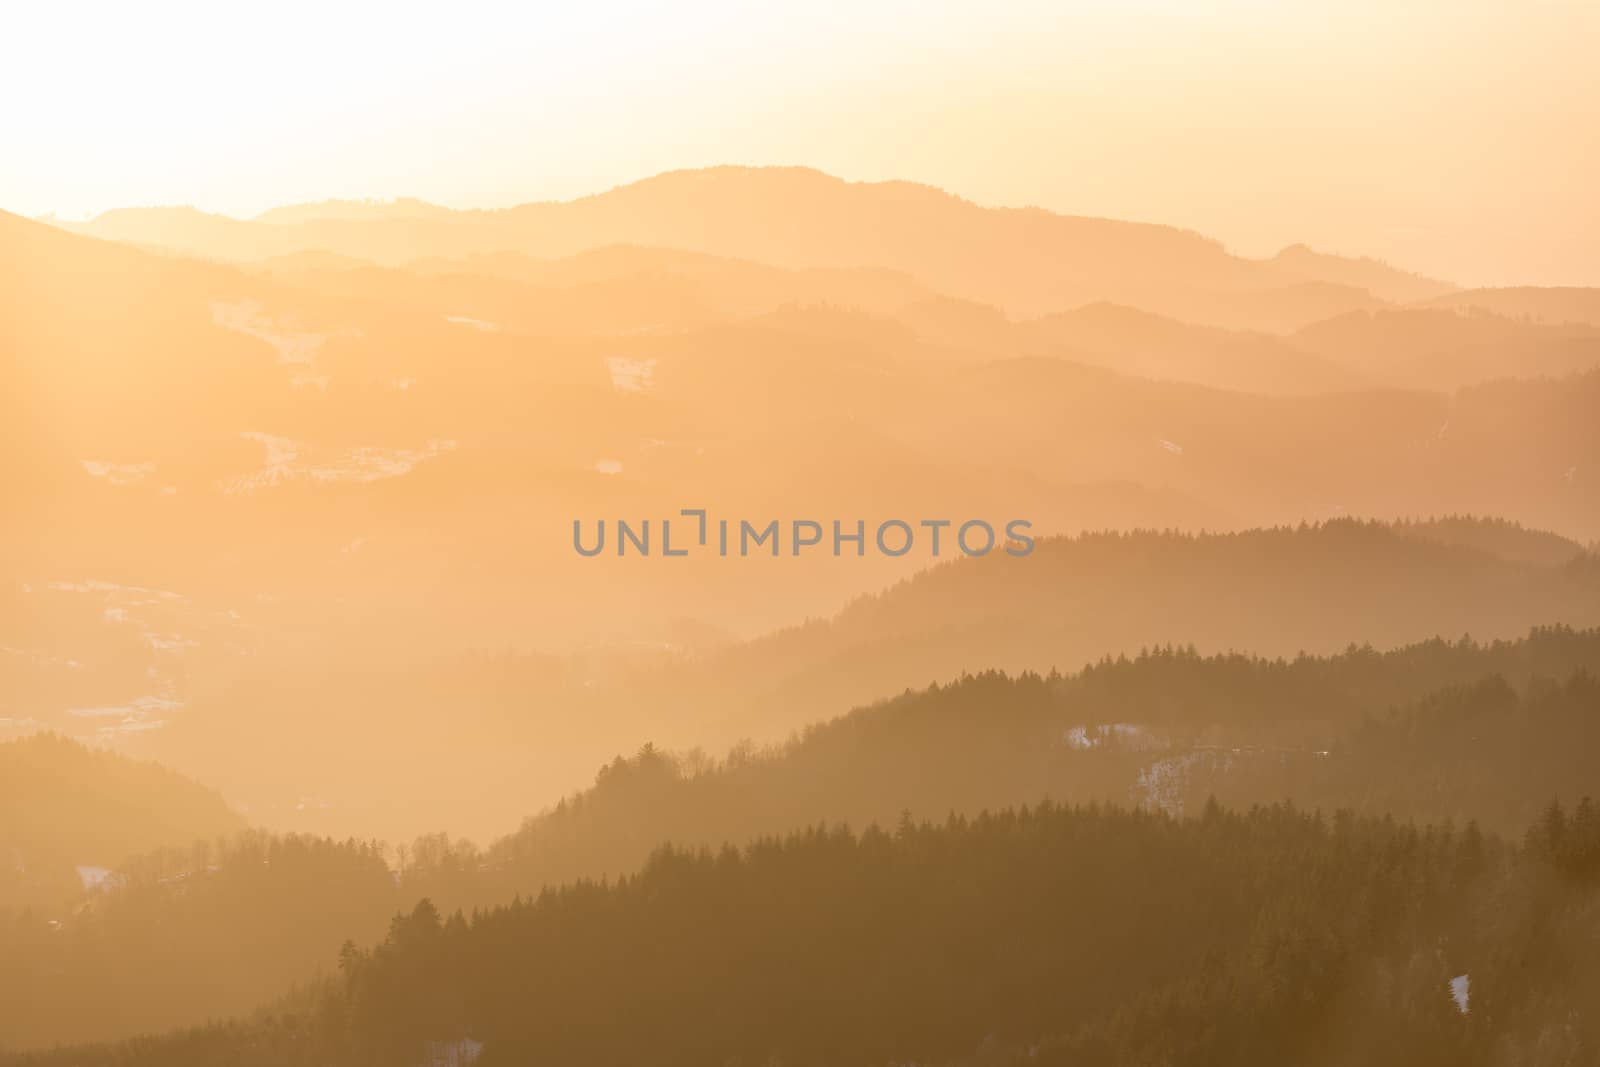 Mountain range at sunset, Black Forest, Germany by fisfra